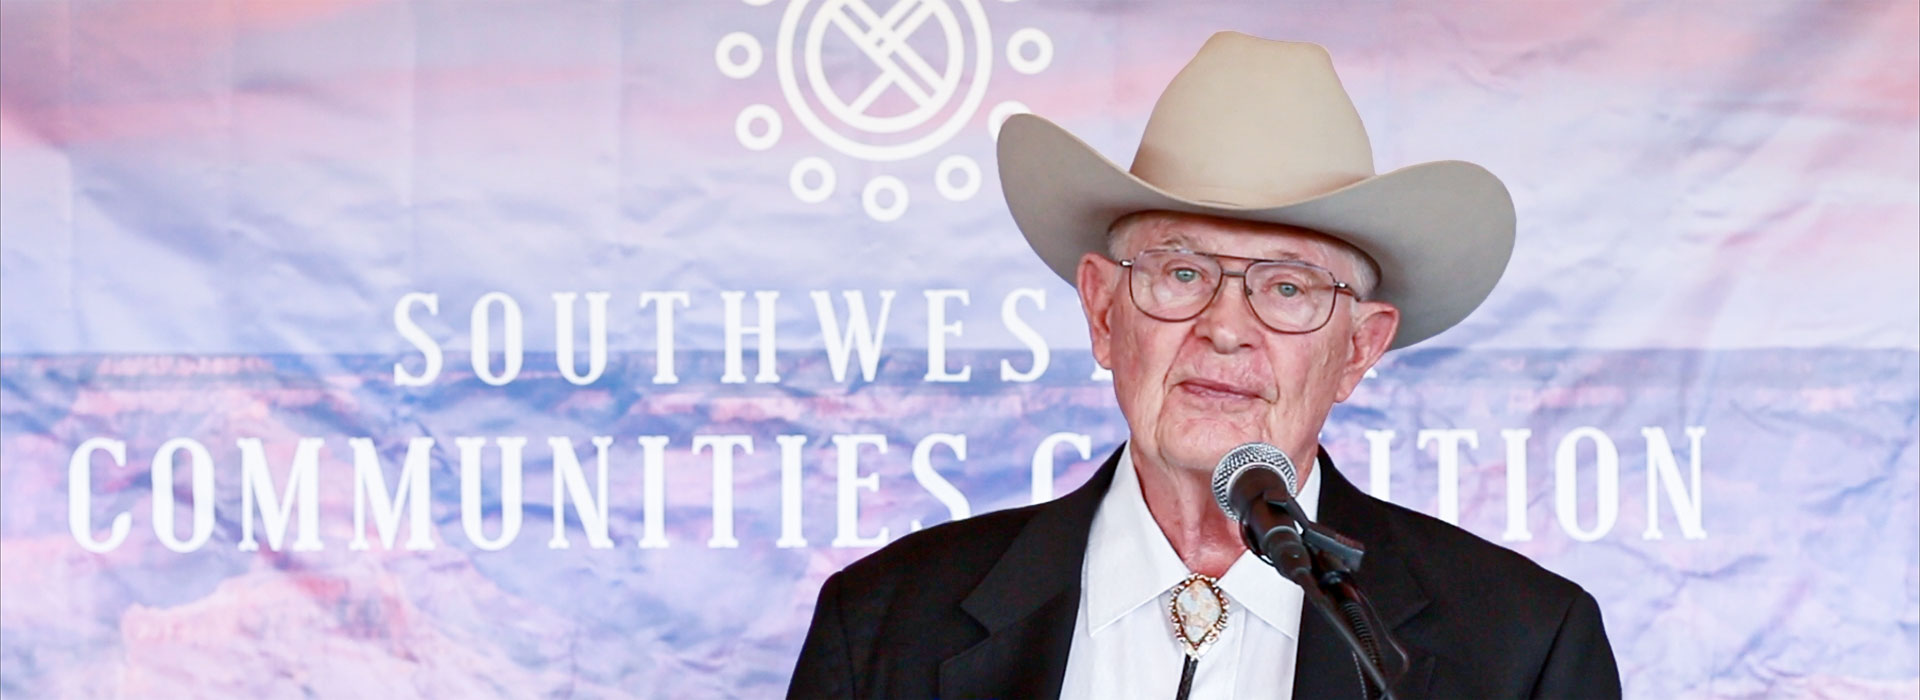 Rancher Jim Chilton Speaks at Southwestern Communities Coalition Kickoff Luncheon